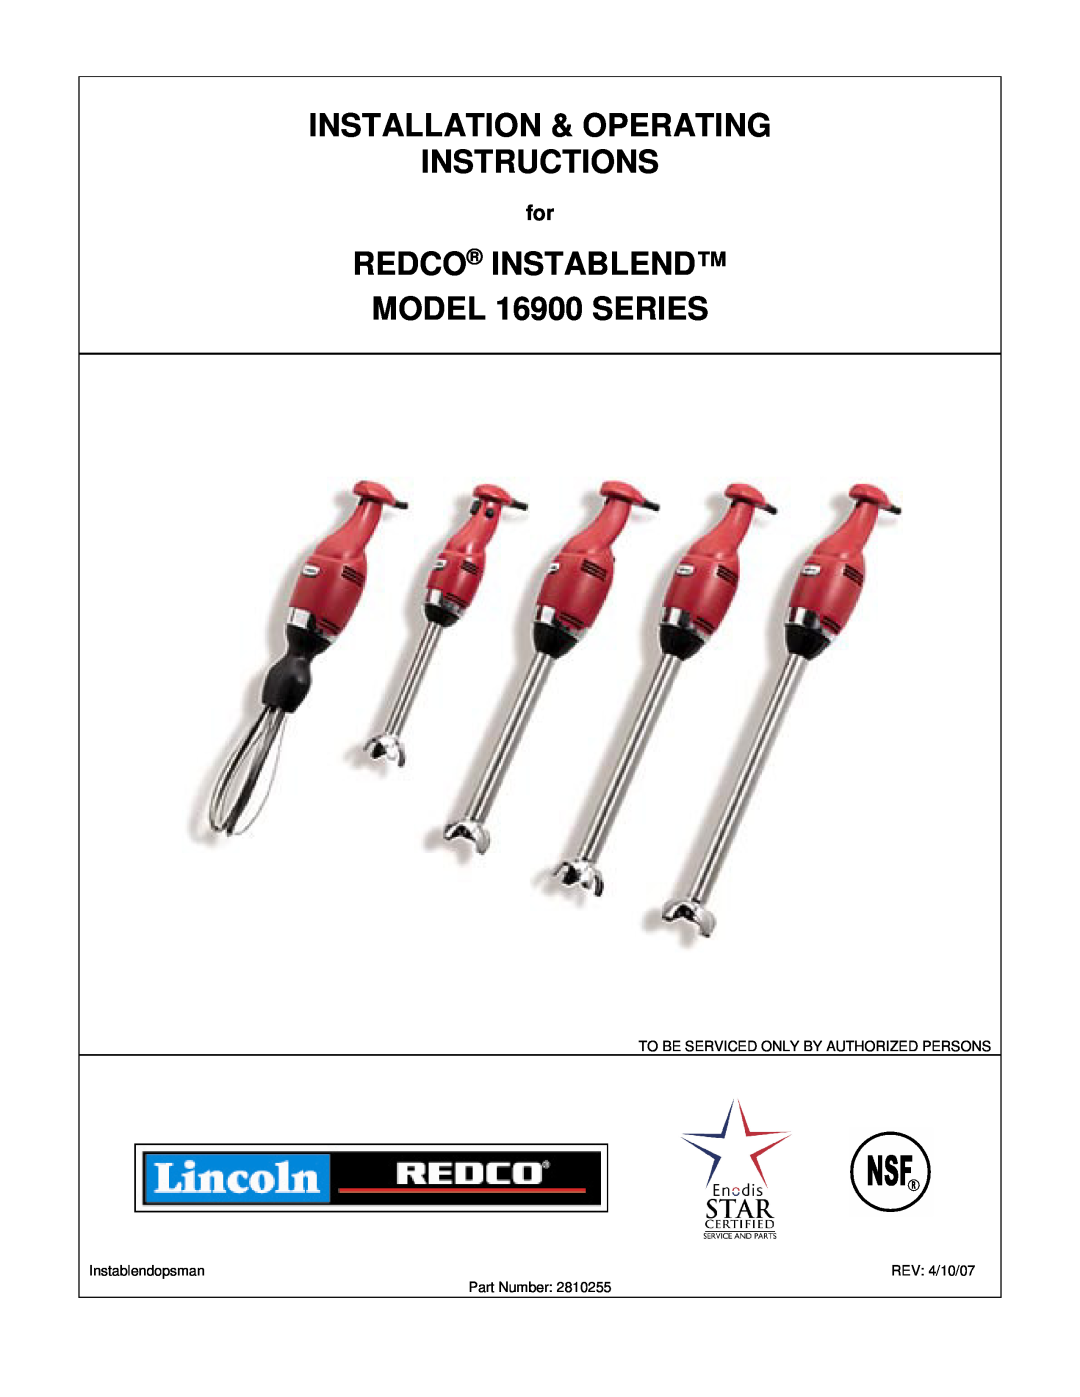 Lincoln operating instructions Installation & Operating Instructions, REDCO INSTABLEND MODEL 16900 SERIES 